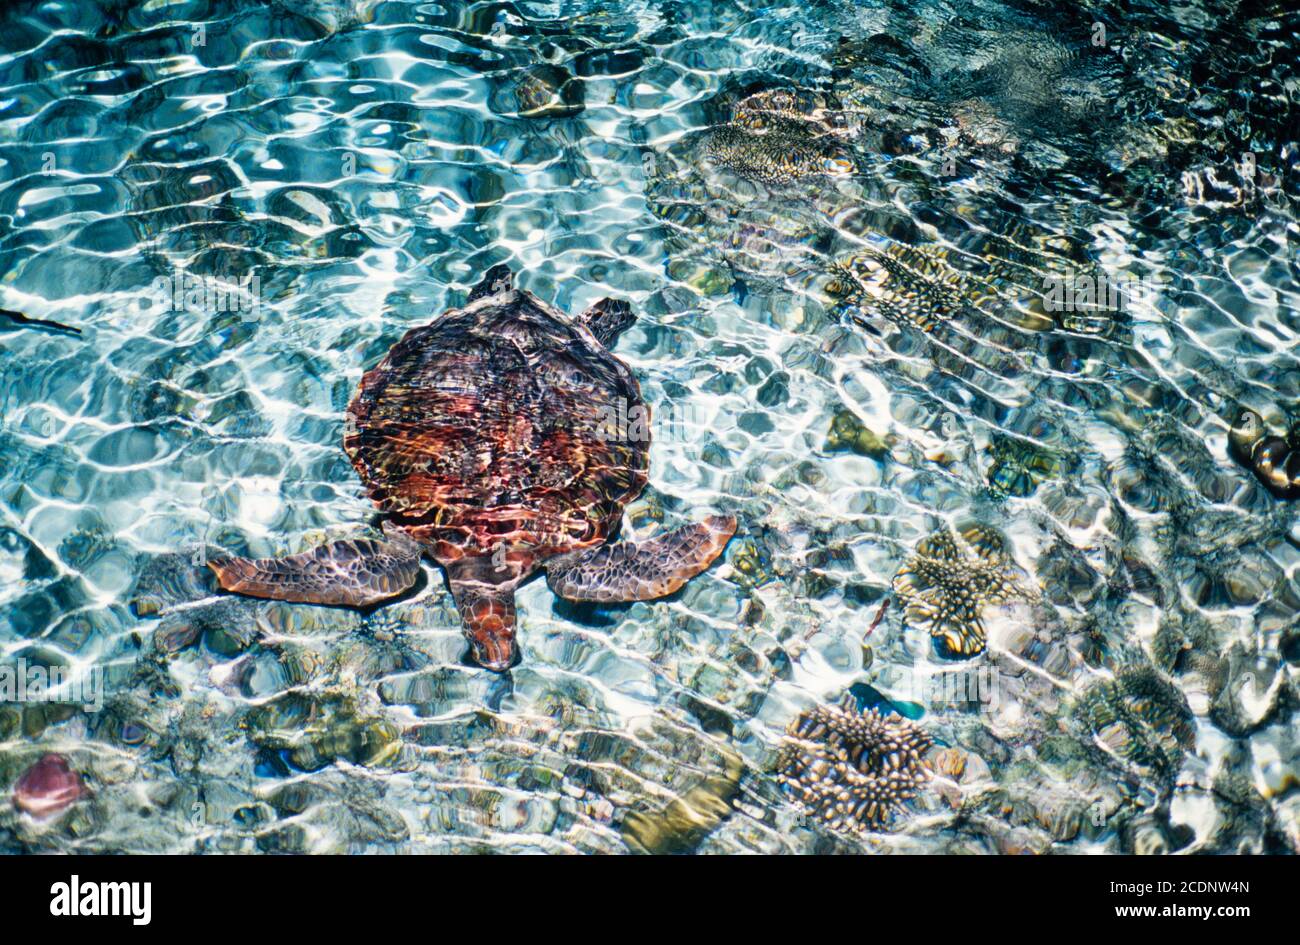 Green Sea Turtle, Chelonia mydas, feeding at night, Ari Atoll, Maldives. Archive image 2002. High resolution scan from transparency, August 2020. Credit: Malcolm Park/Alamy. Stock Photo